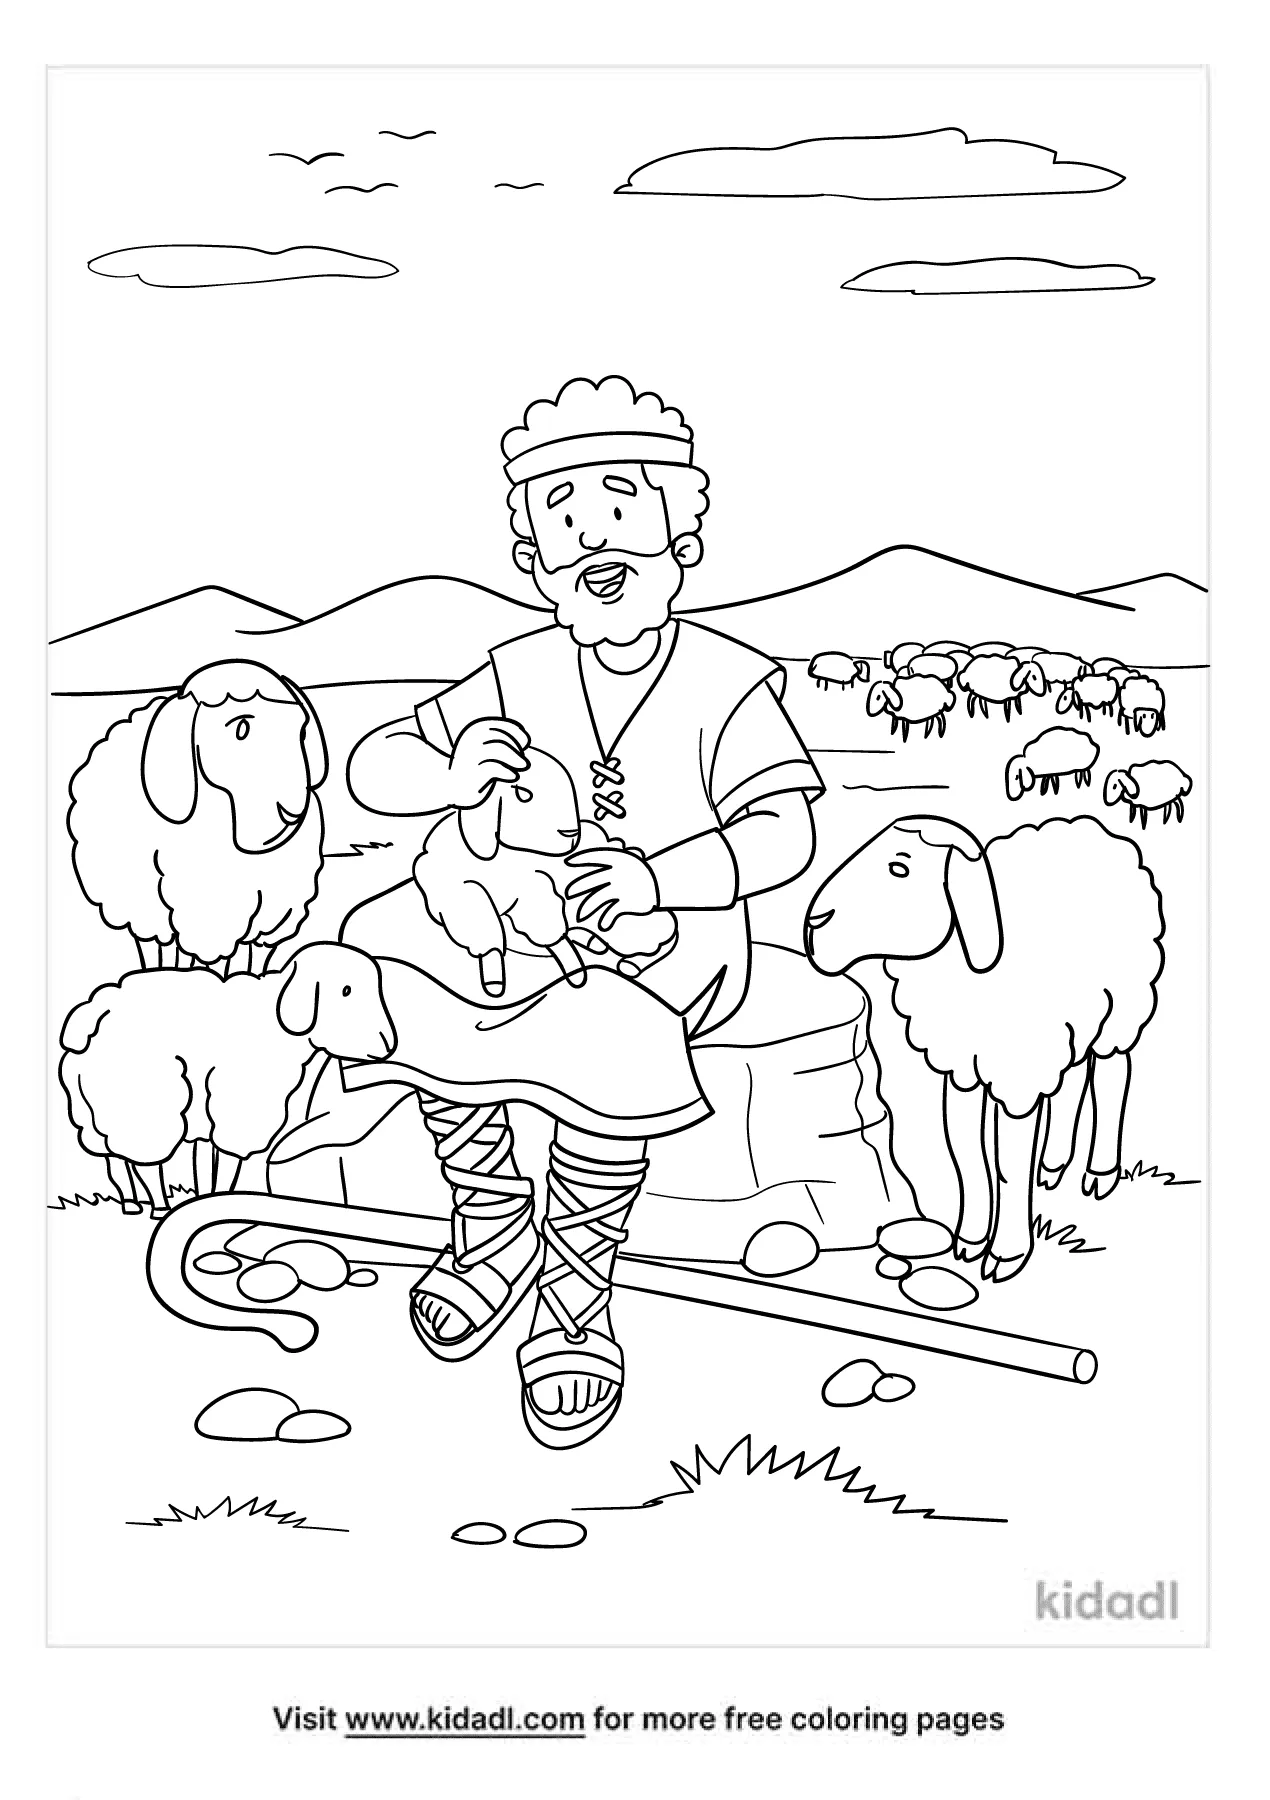 shepherd coloring pages